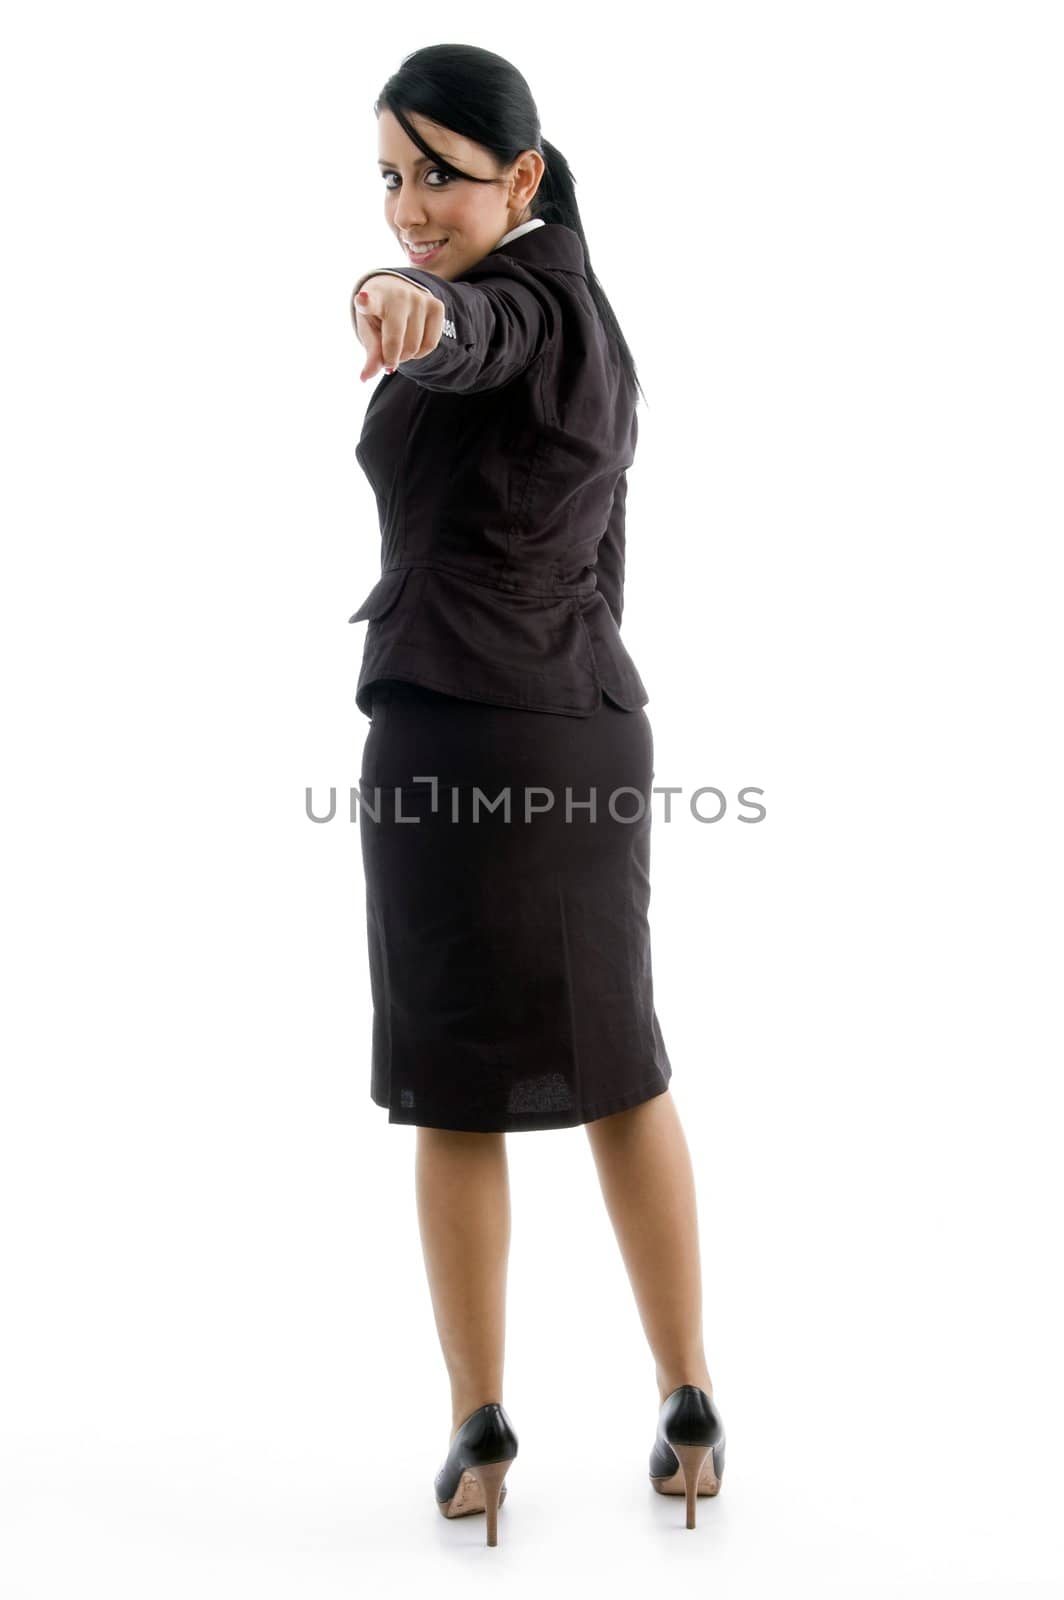 back pose of businesswoman pointing by imagerymajestic